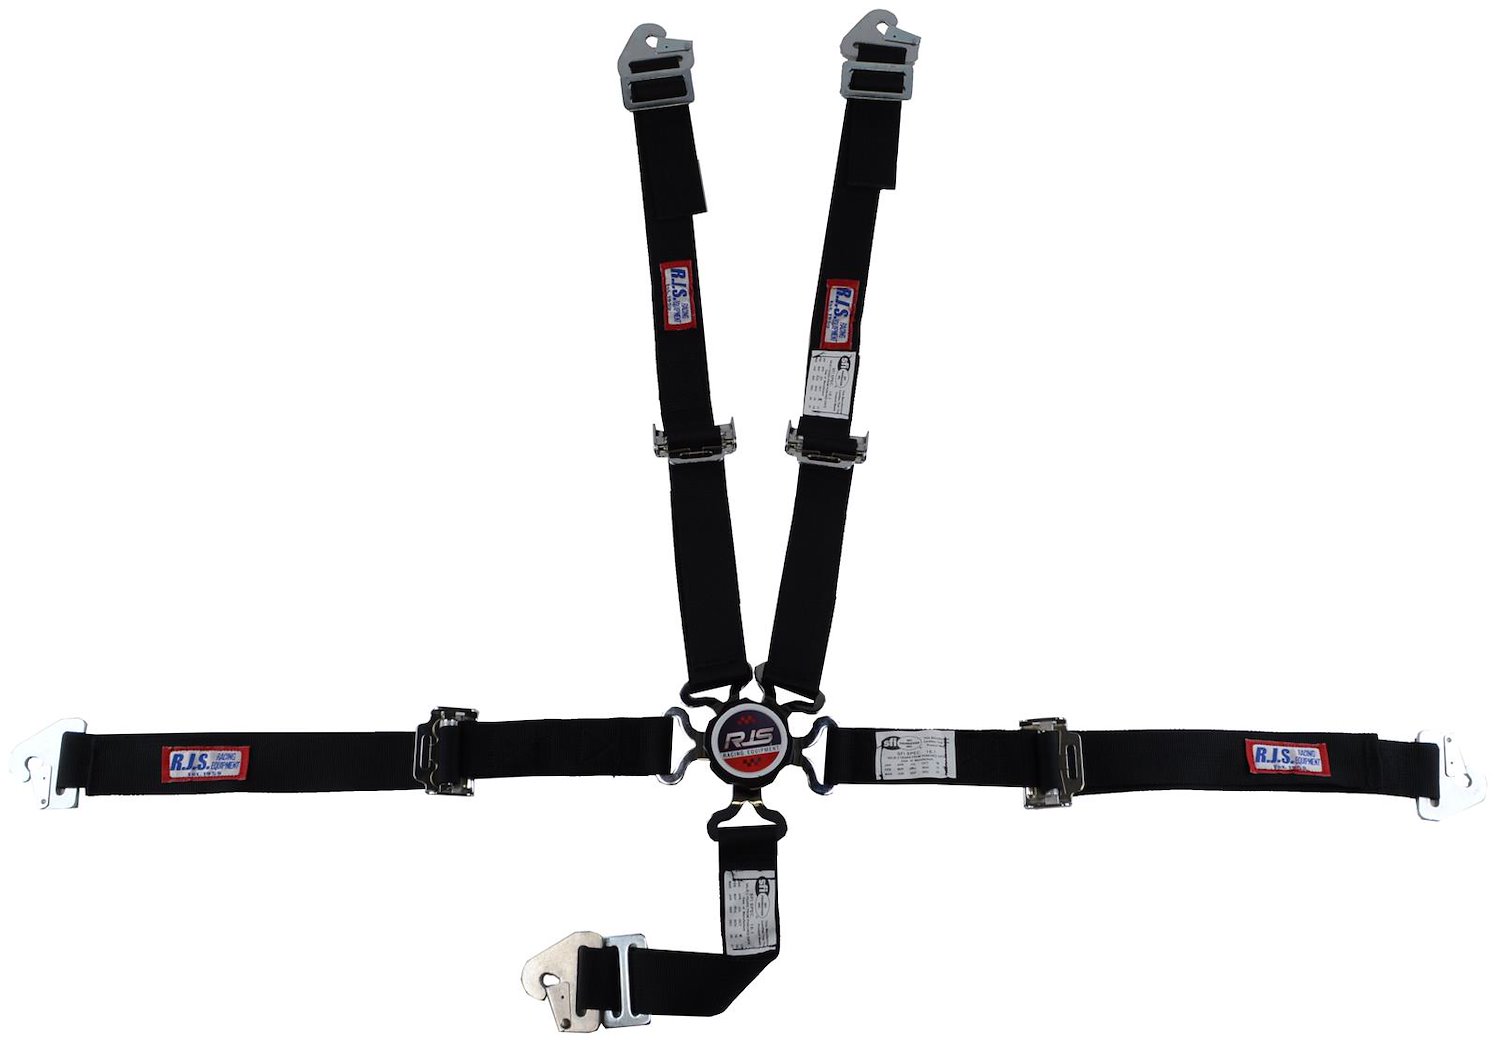 SFI 16.1 CAM-LOCK HARNESS 2 PULL UP Lap Belt 2 Shoulder Harness Individual ROLL BAR Mount 2 DOUBLE S